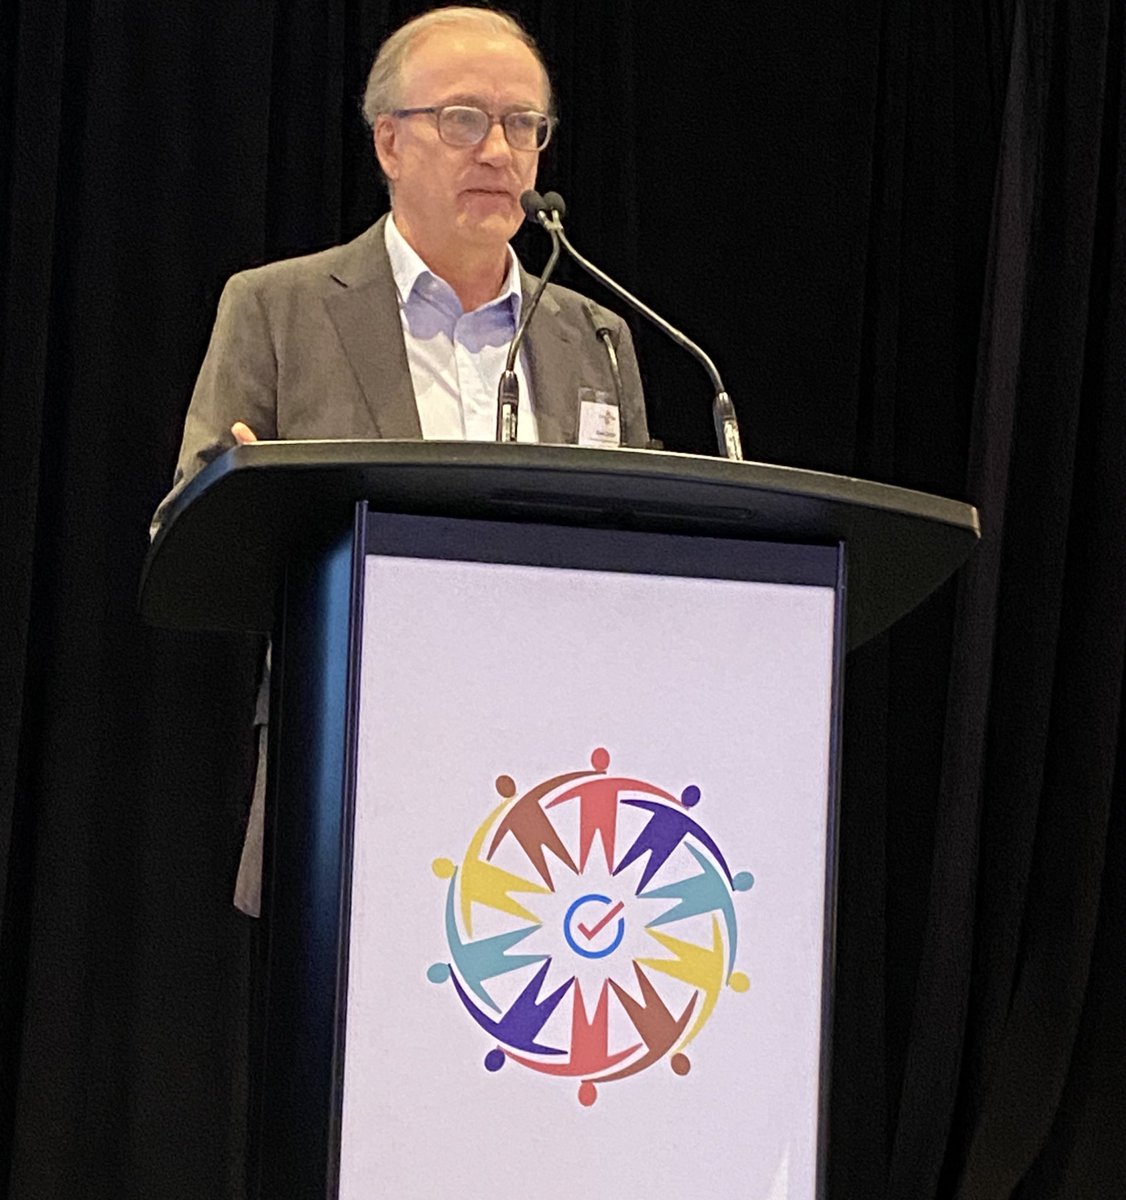 Working as a lawyer/mediator/investigator for the last 25 years Blaine Donais joins our bargaining conference and talks about behaviours, the human process behind negotiations and ways to navigate after the dust settles. #onted